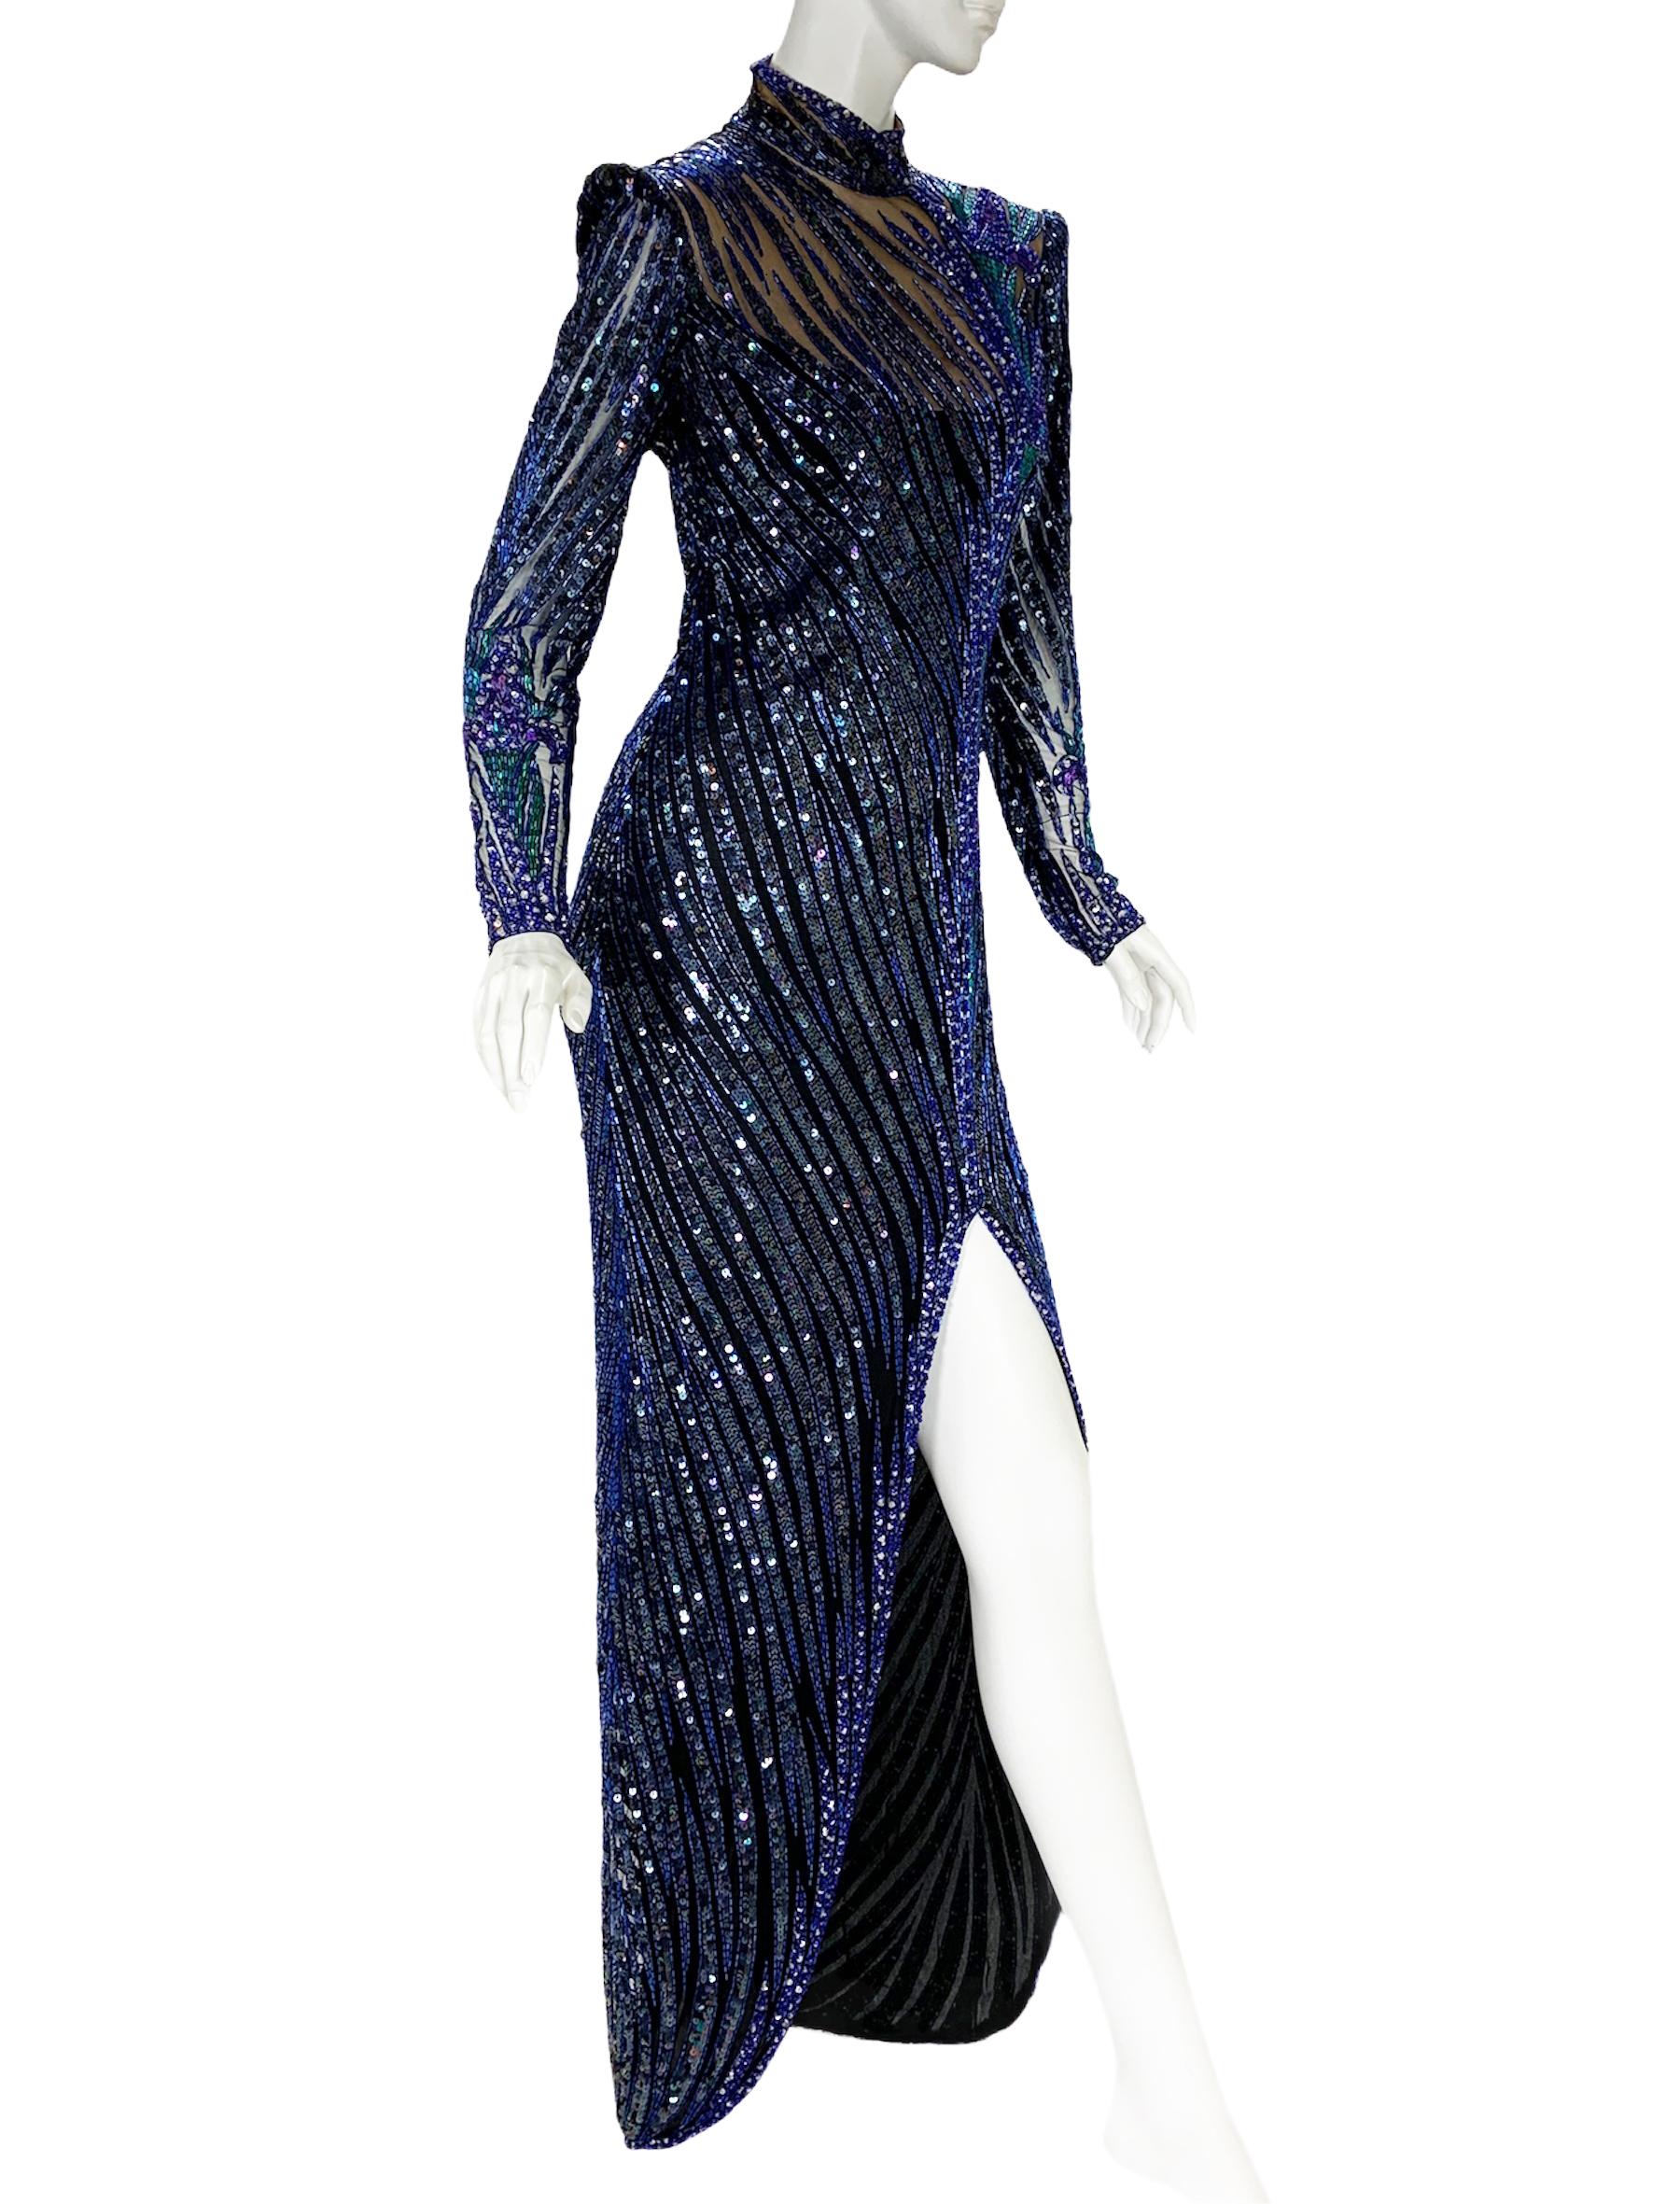 Vintage Bob Mackie Fully Embellished Long Dress Gown
Designer size 10 ( modern size will be smaller - pls. check measurements).
Hand Beaded, 100% Silk, Navy Blue Sequins Background, Beaded Purple Iris Flowers Makes this Dress Absolutely Different